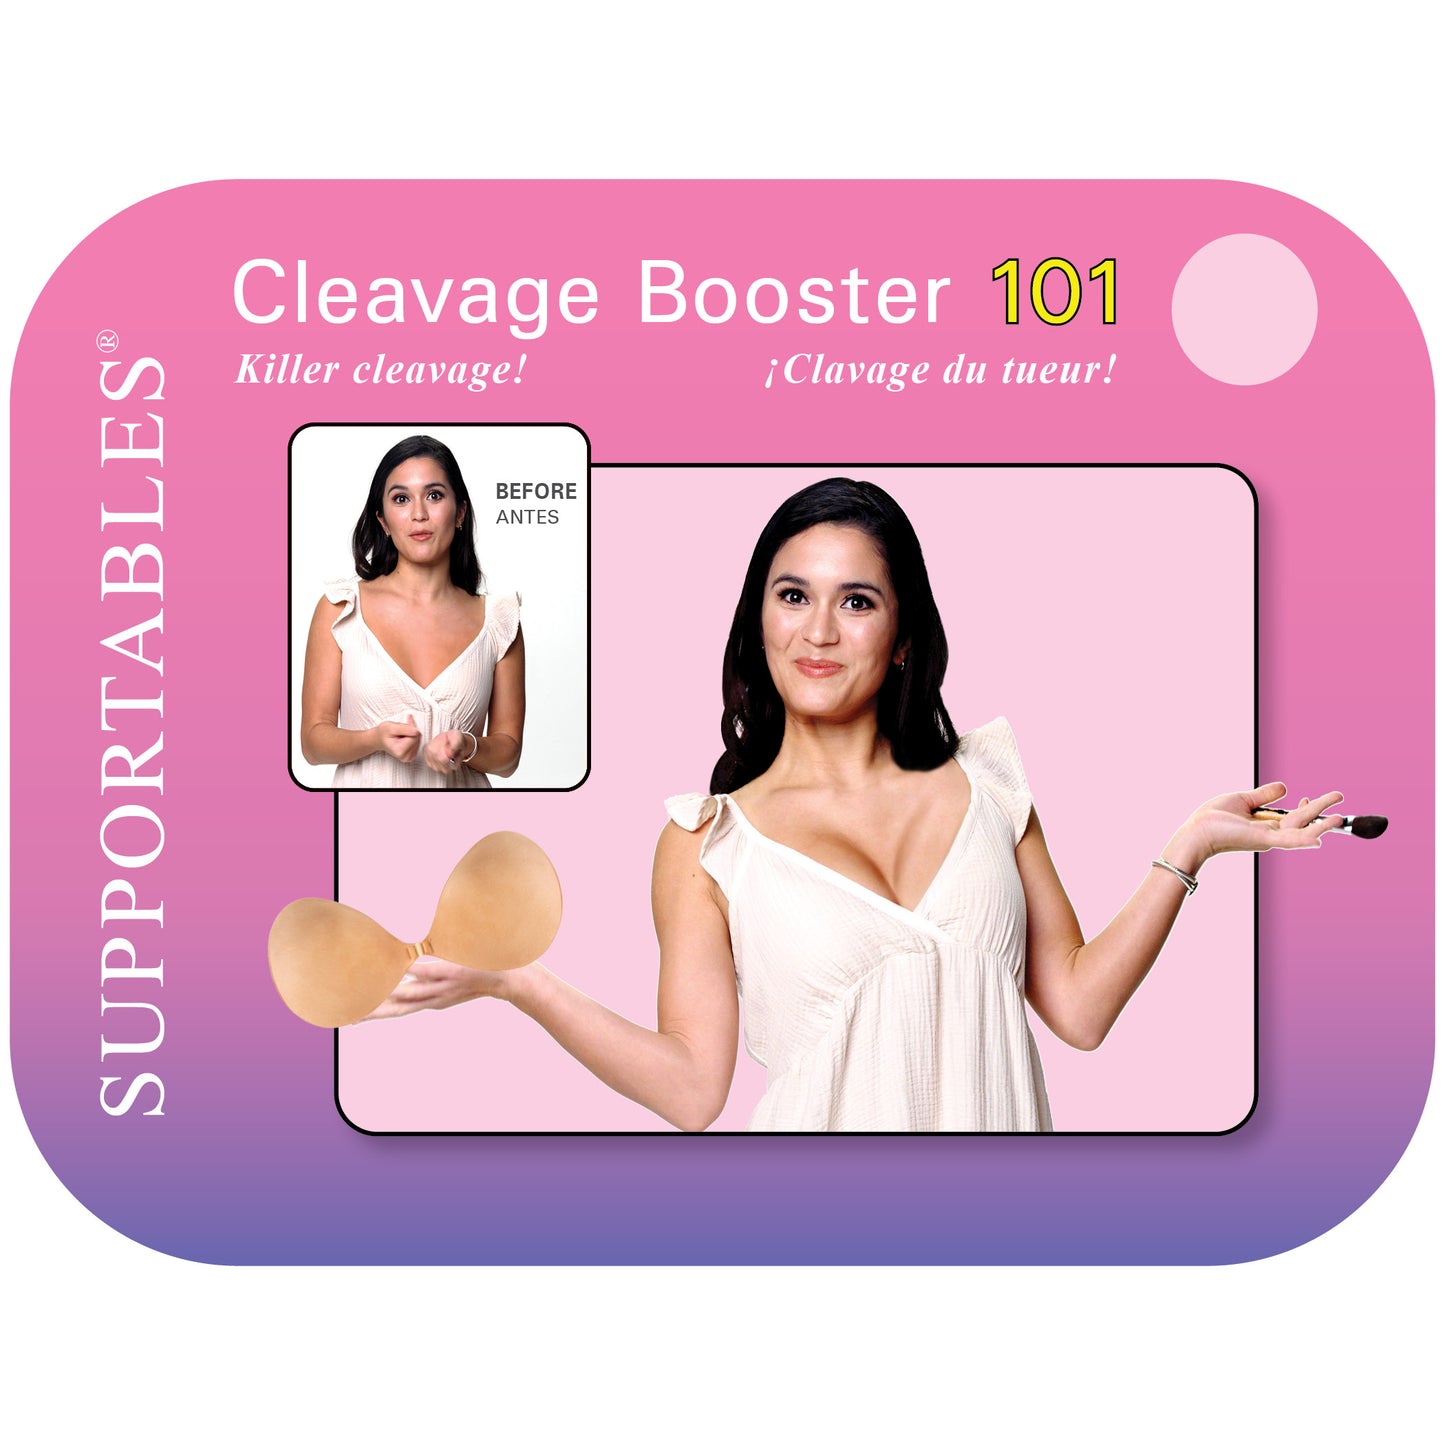 CLEAVAGE BOOSTER 101